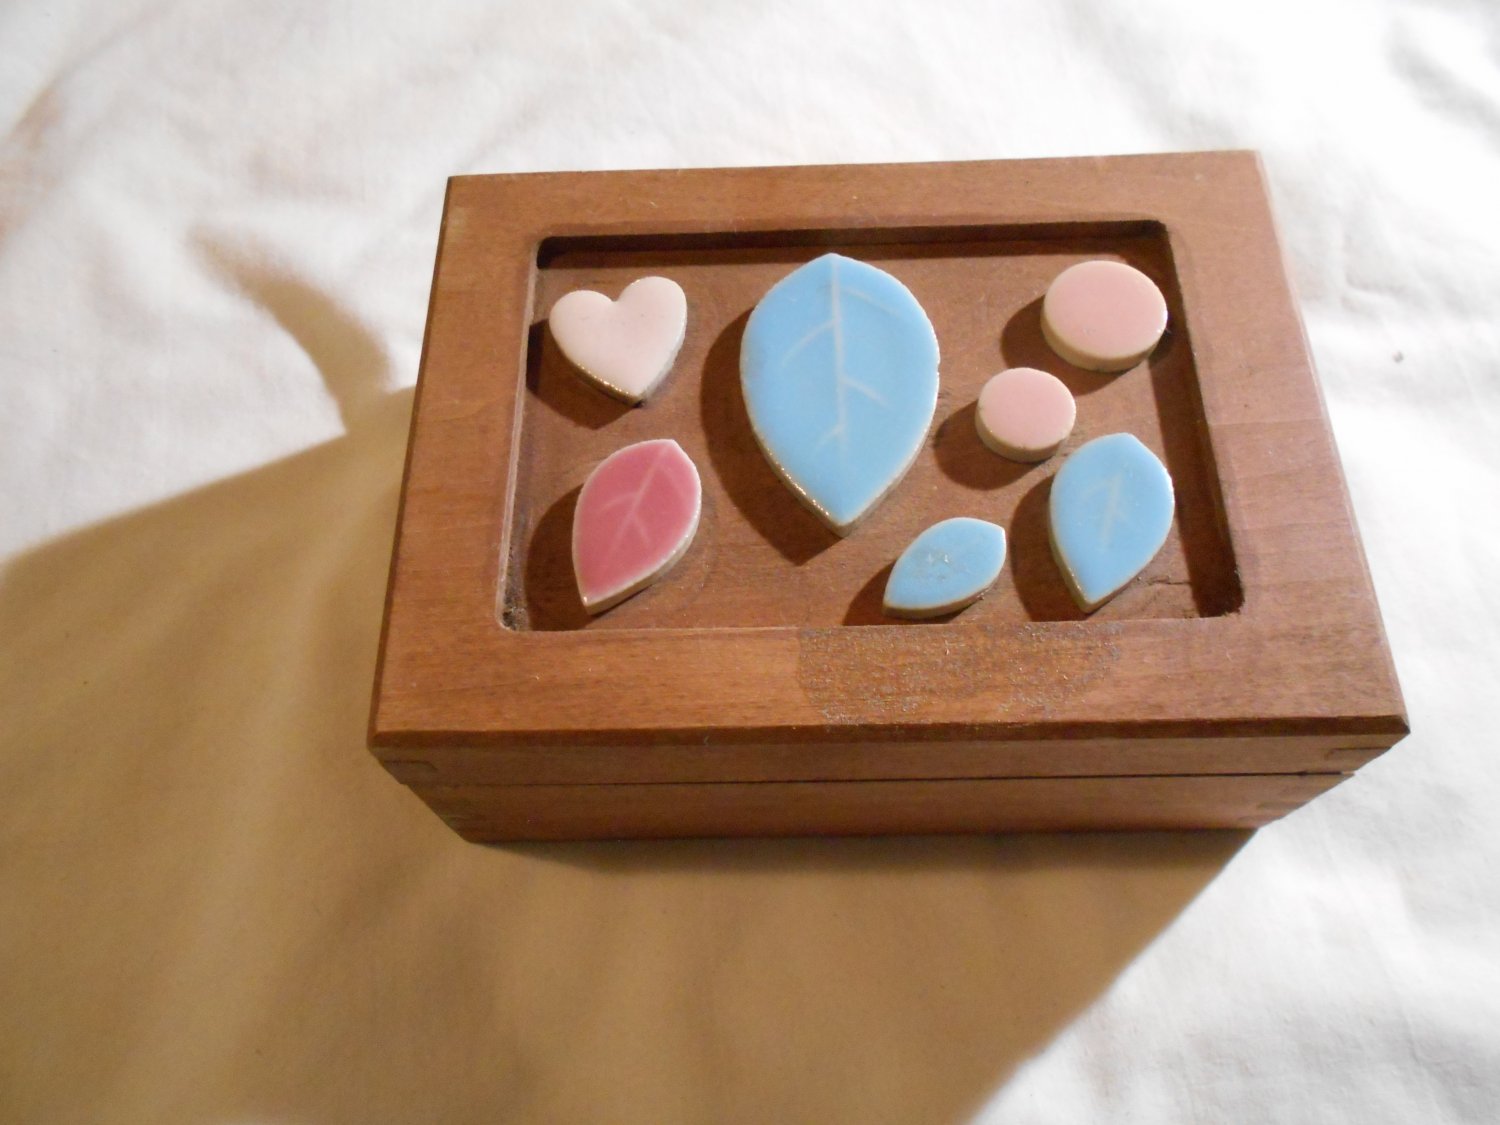 Wood Jewelry Box with Leaf, Heart and Circle Tiles on Top (167)